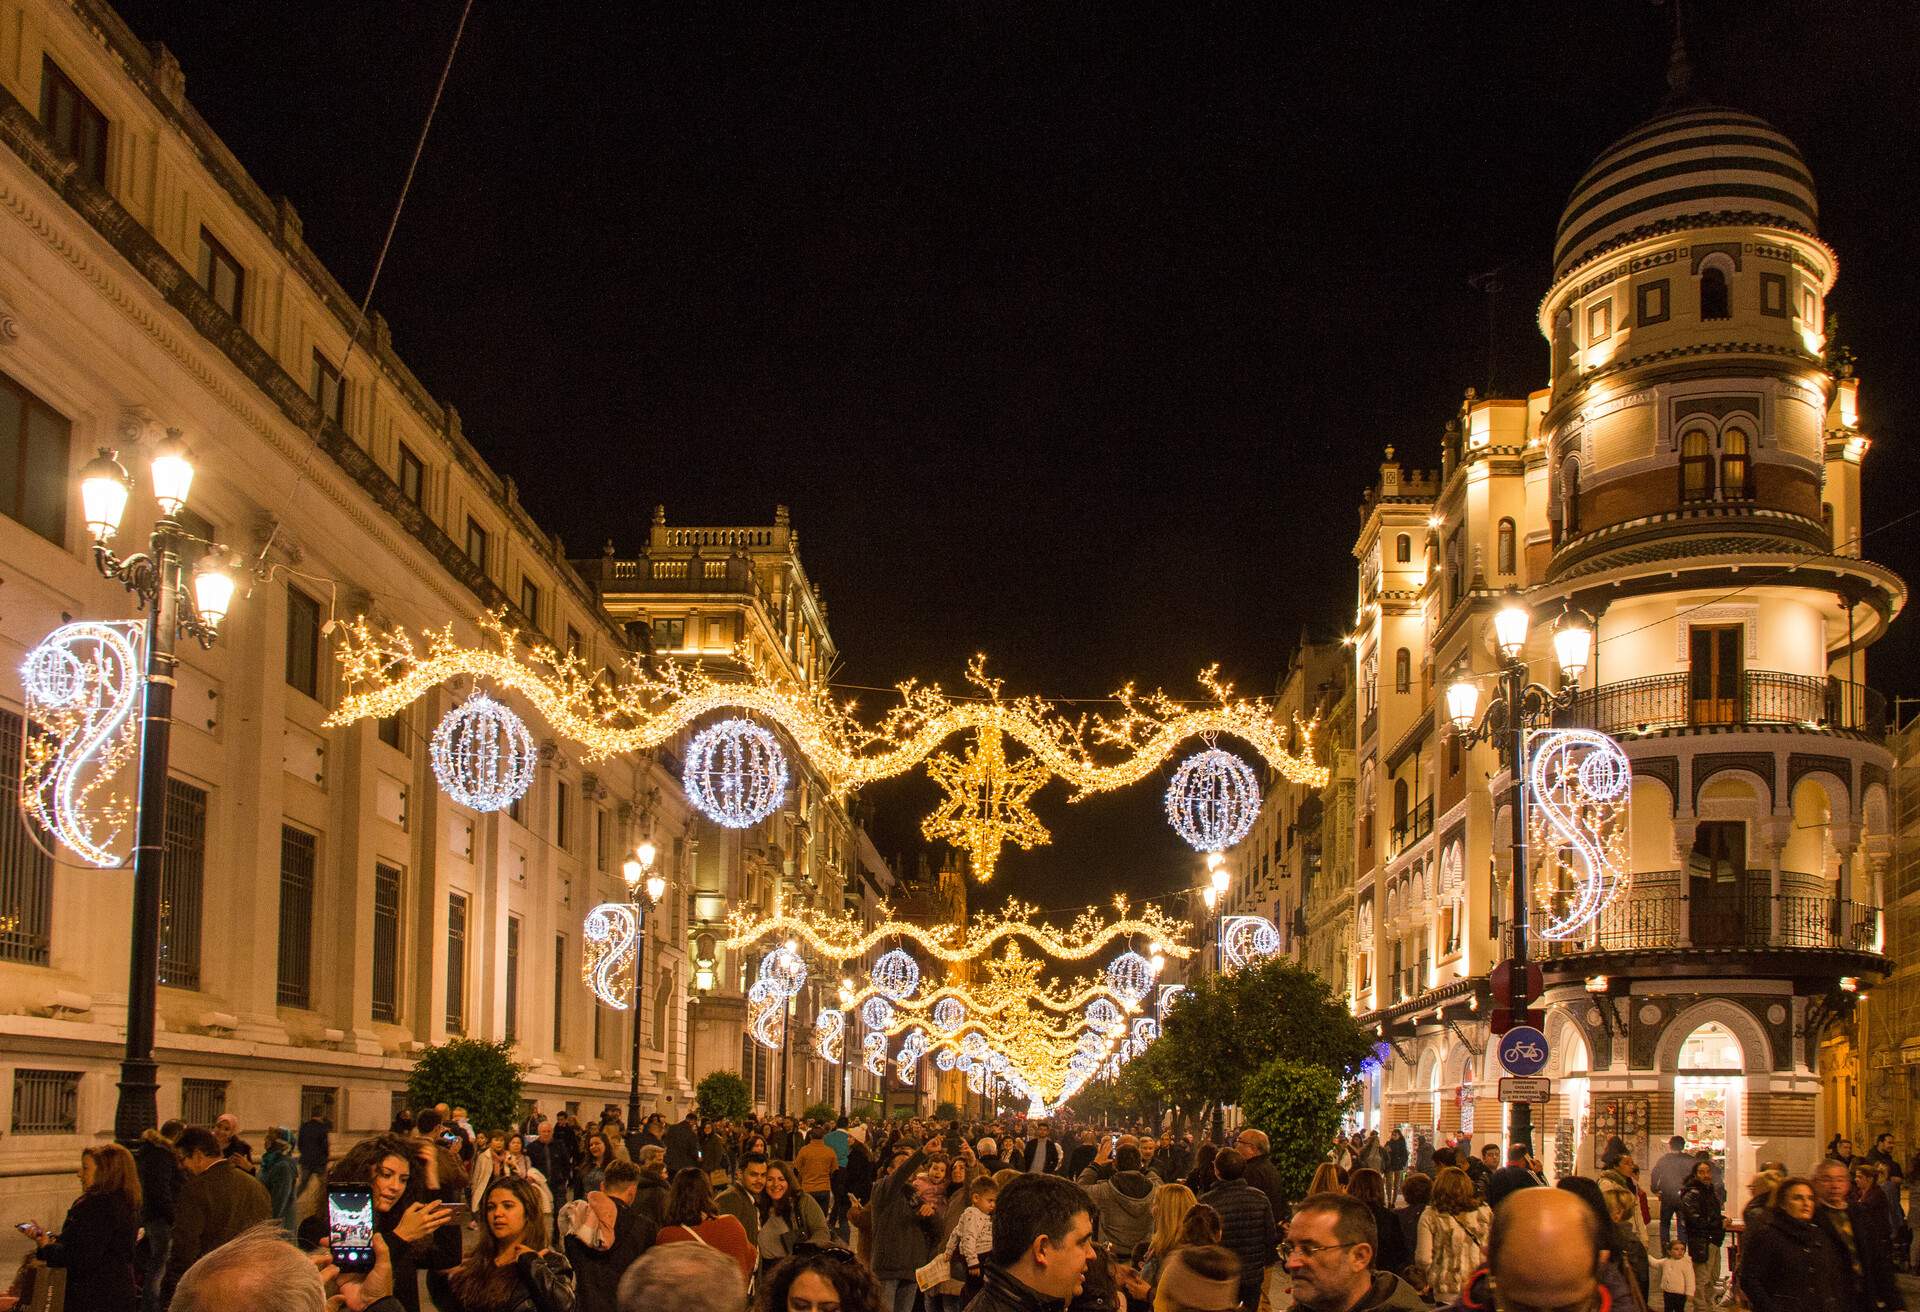 Festive lights hanging over a street lined with elegant structures and packed with people.